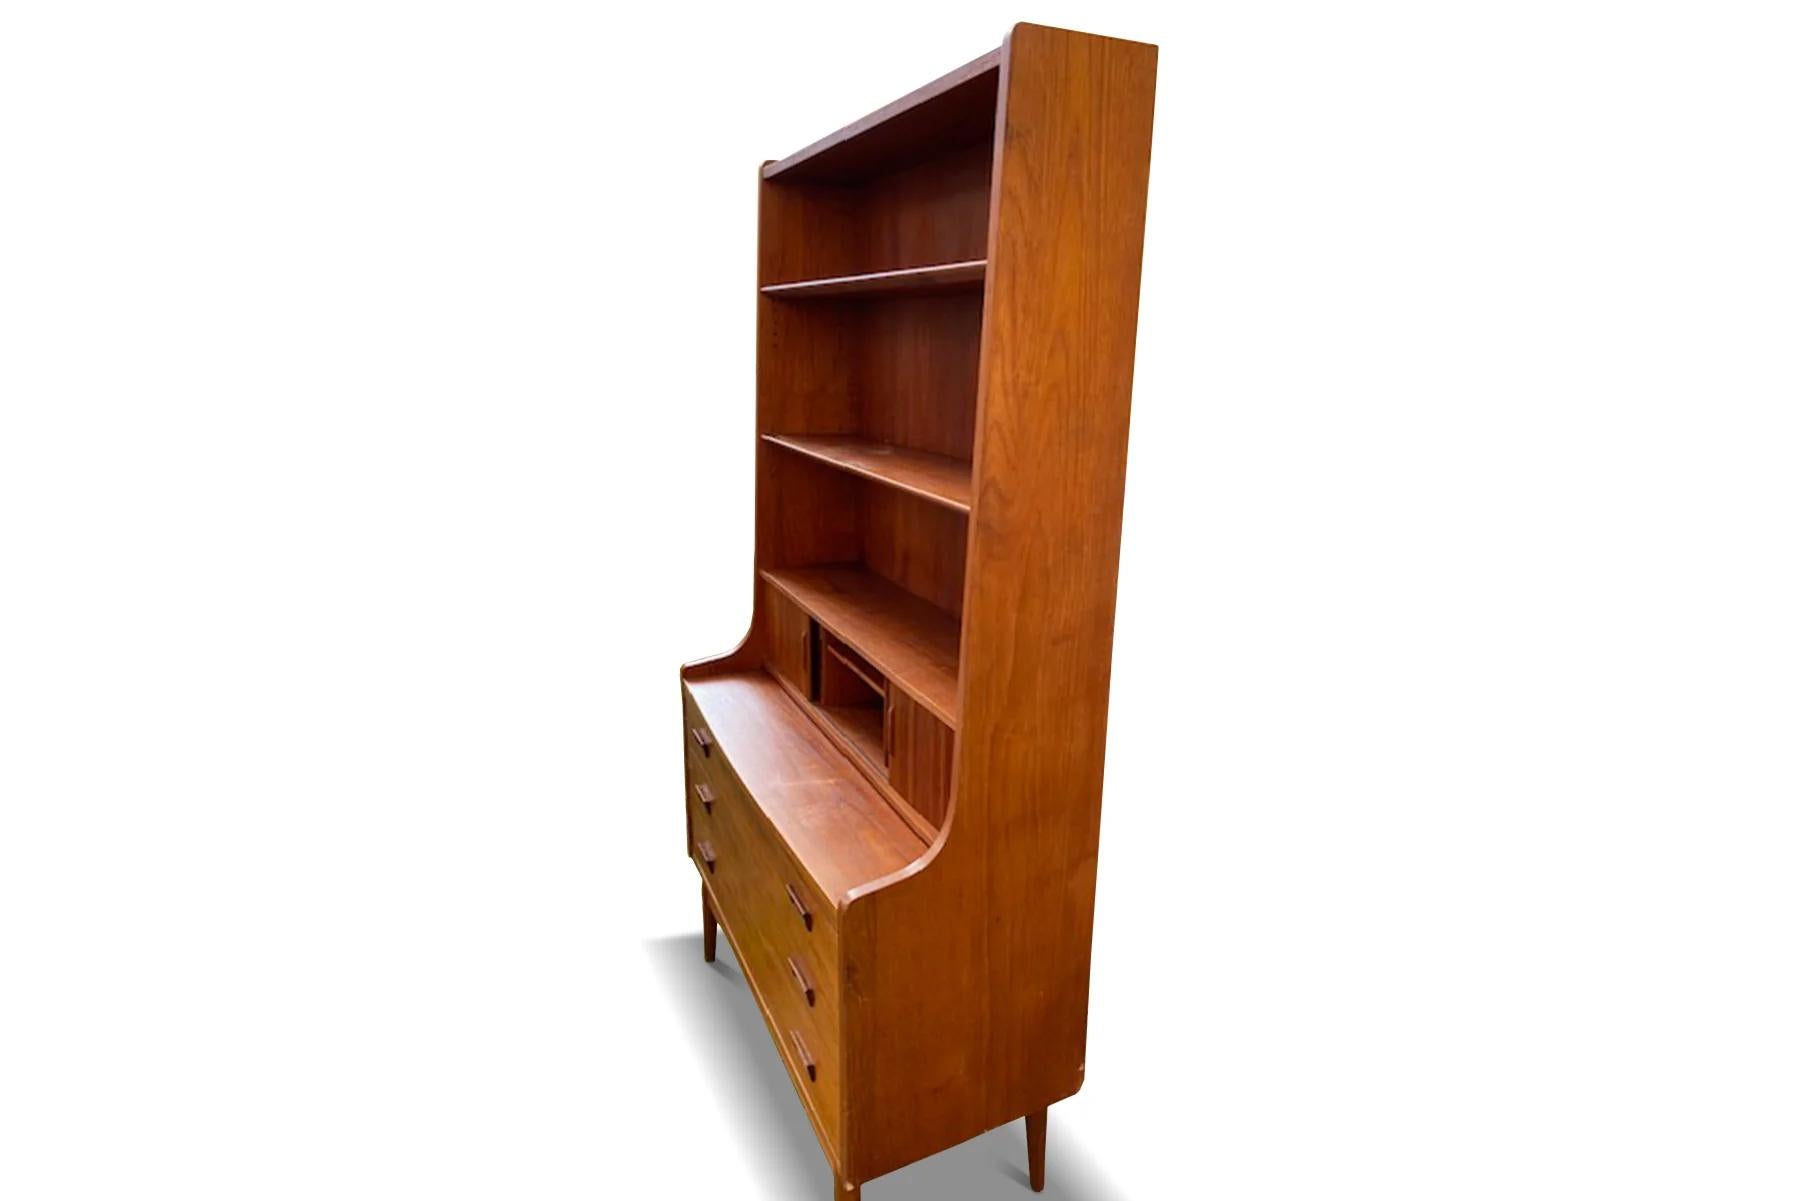 Origin: Denmark
Designer: Johanes Sorth
Manufacturer: Nexø / Bornholms
Era: 1960s
Materials: Teak
Measurements: 39.5″ wide x 17.5″ deep x 72″ tall

Condition: In excellent original condition with typical wear for its vintage.

Price includes a full